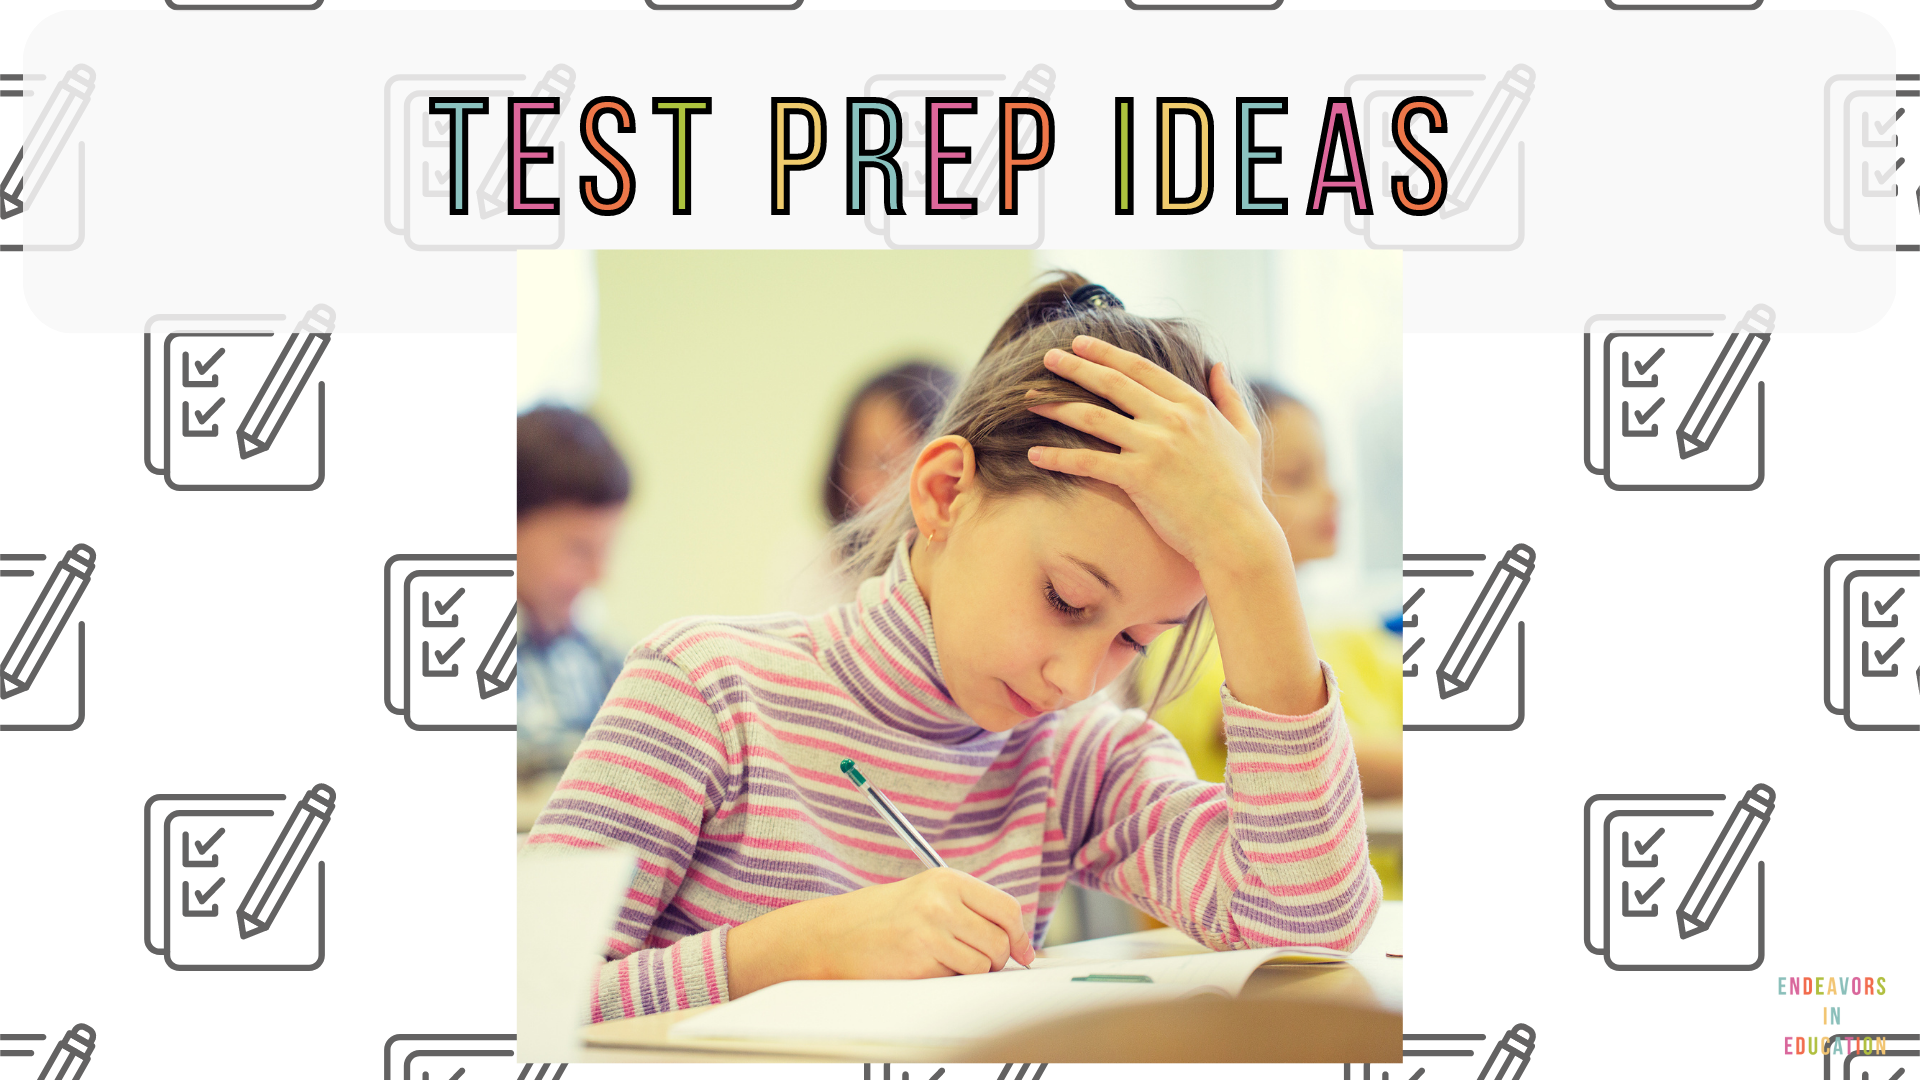 Text says test prep ideas and shows a girl taking a test with her hand on her head